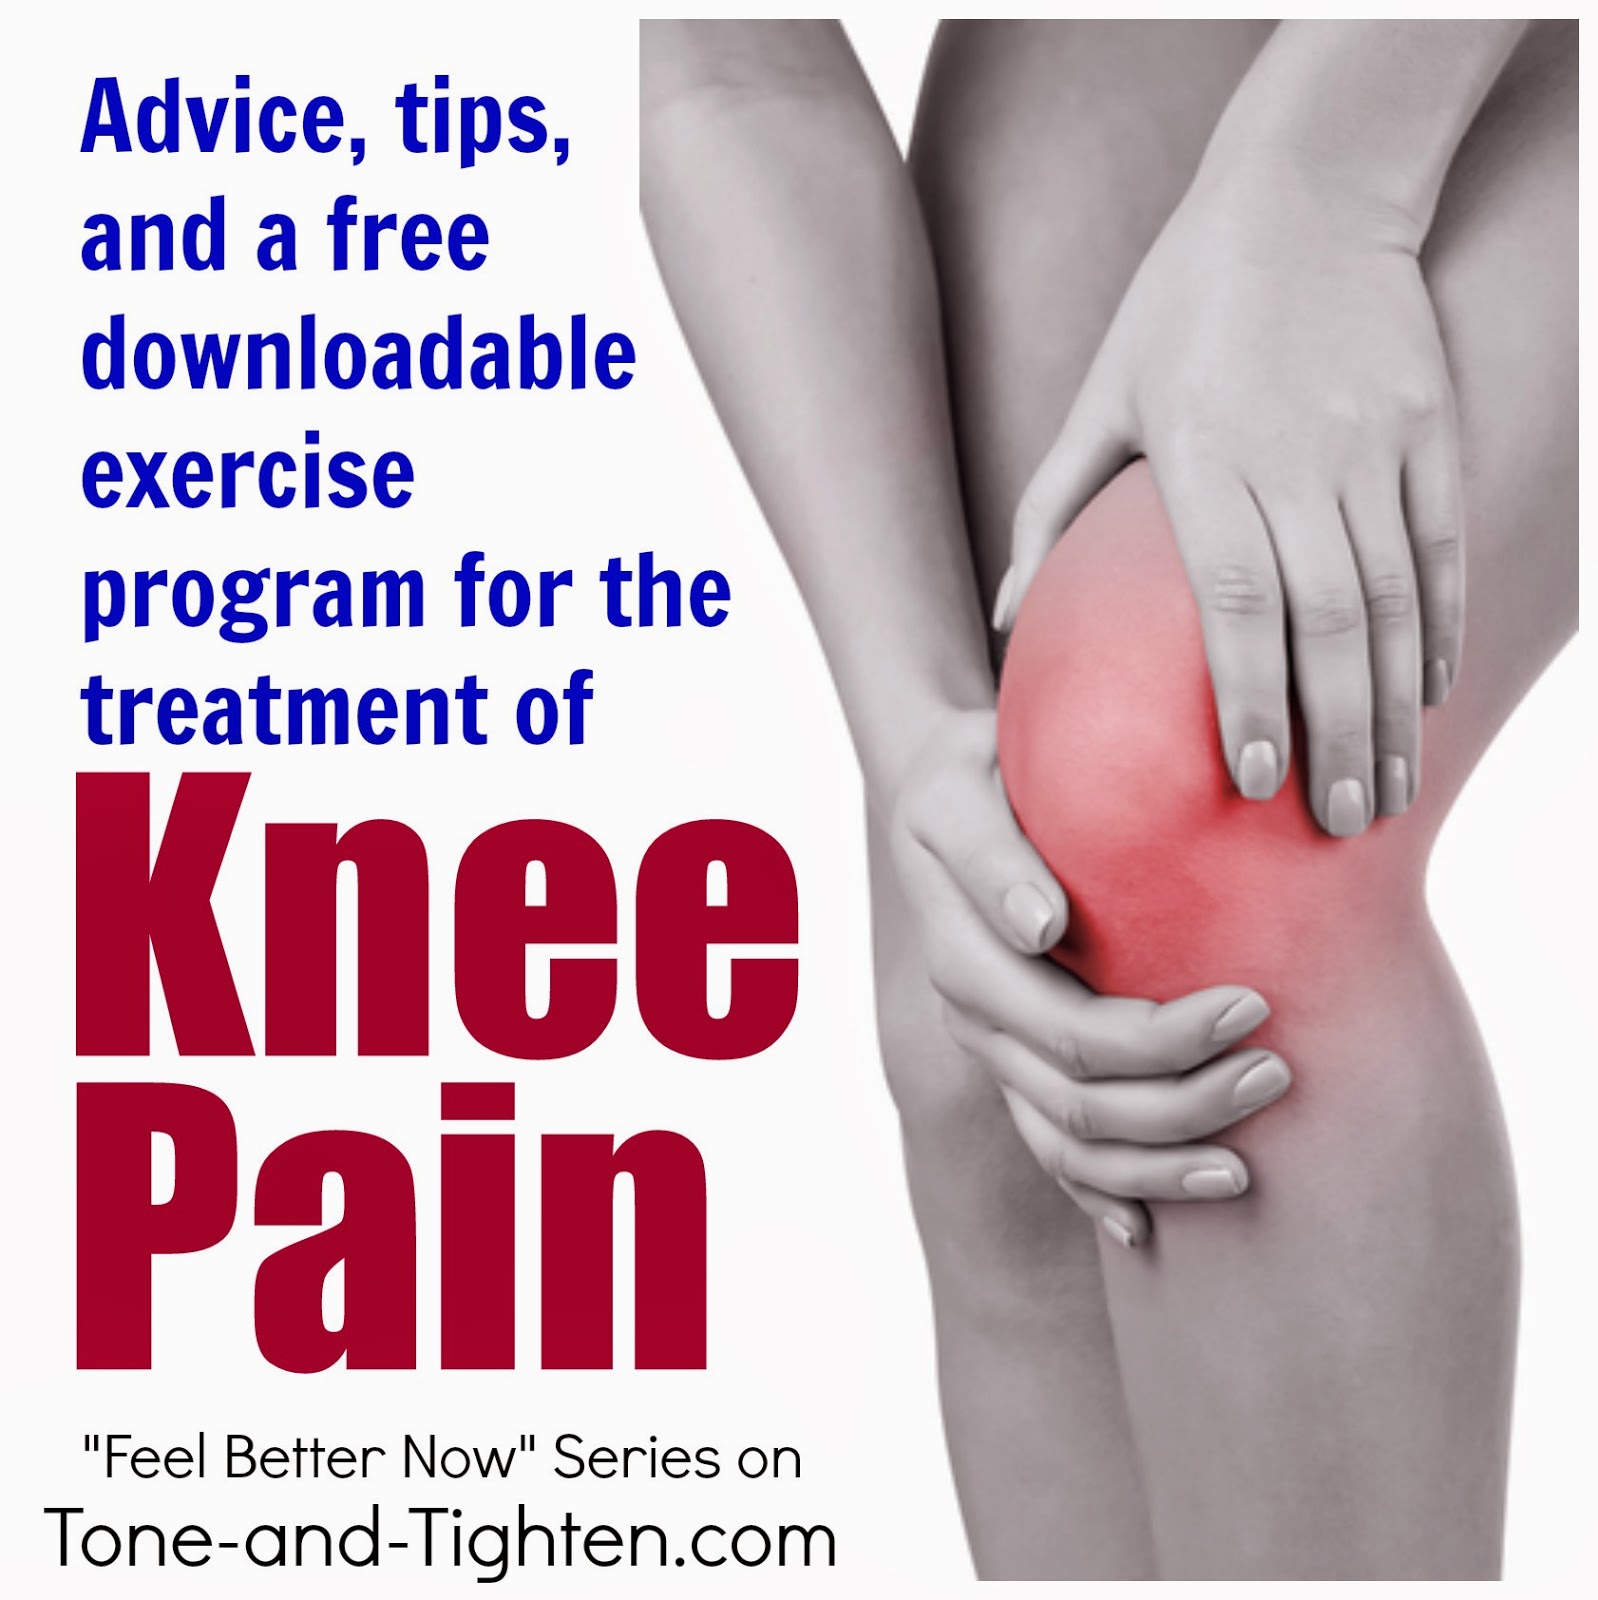 https://tone-and-tighten.com/2014/03/feel-better-now-series-how-to-treat-knee-pain-free-download.html